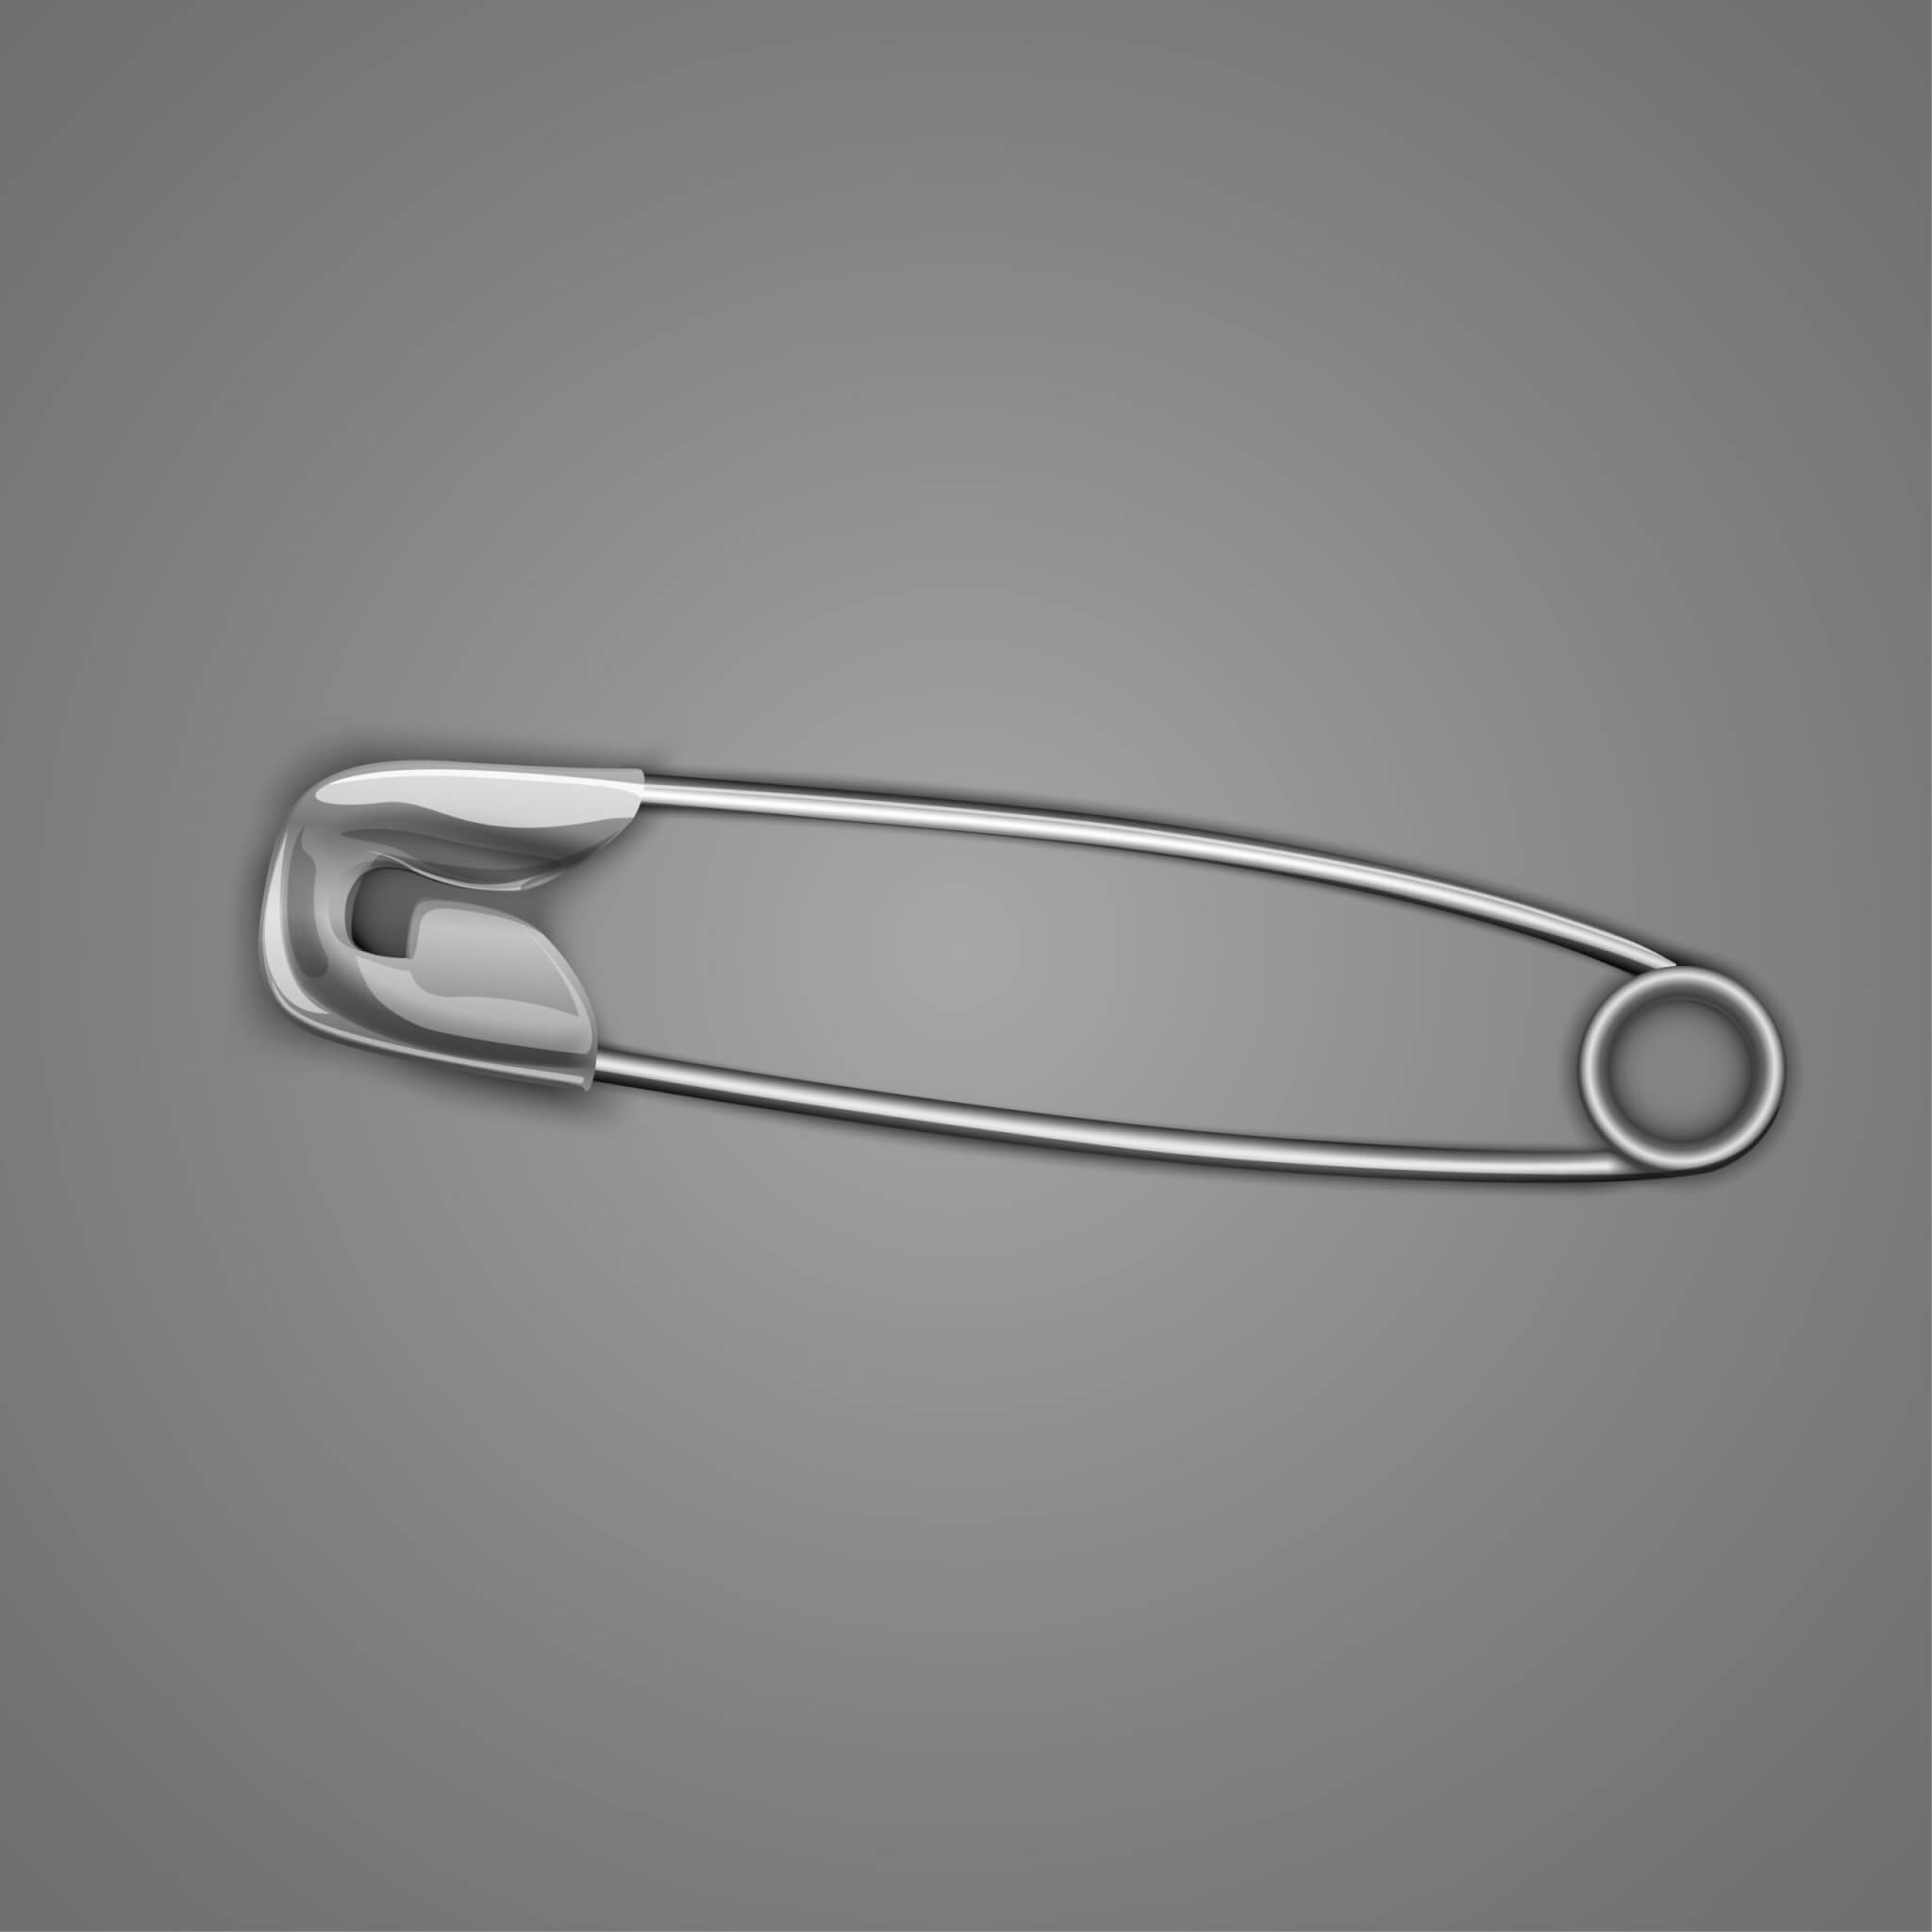 International Safety Pin Day (April 10th)